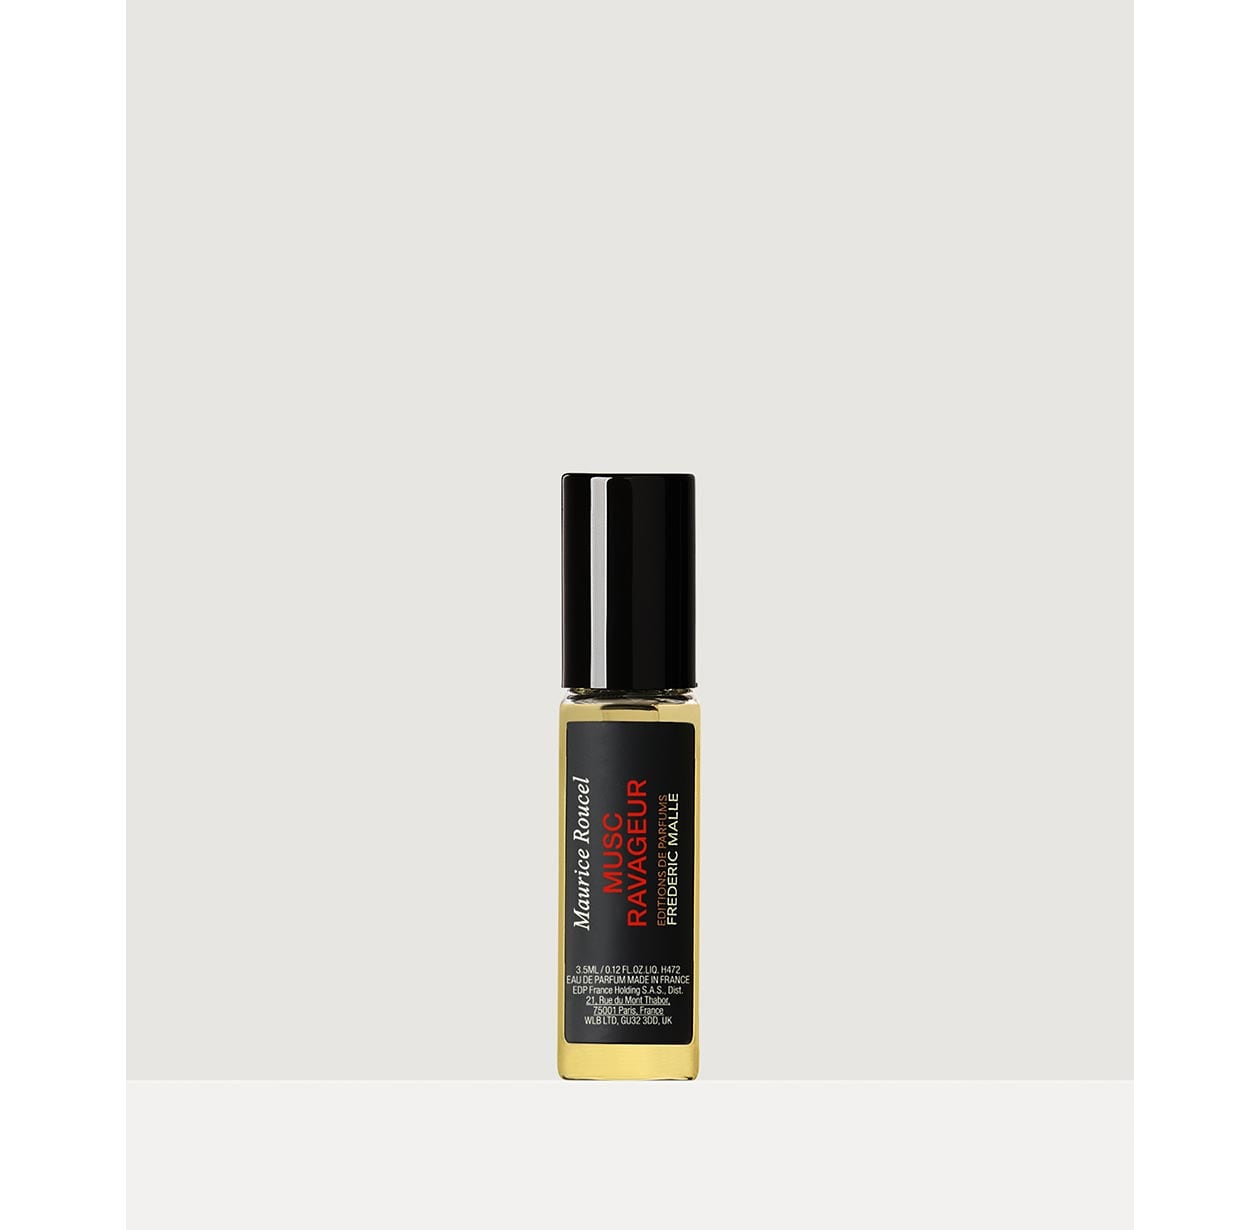 MUSC RAVAGEUR | Frederic Malle